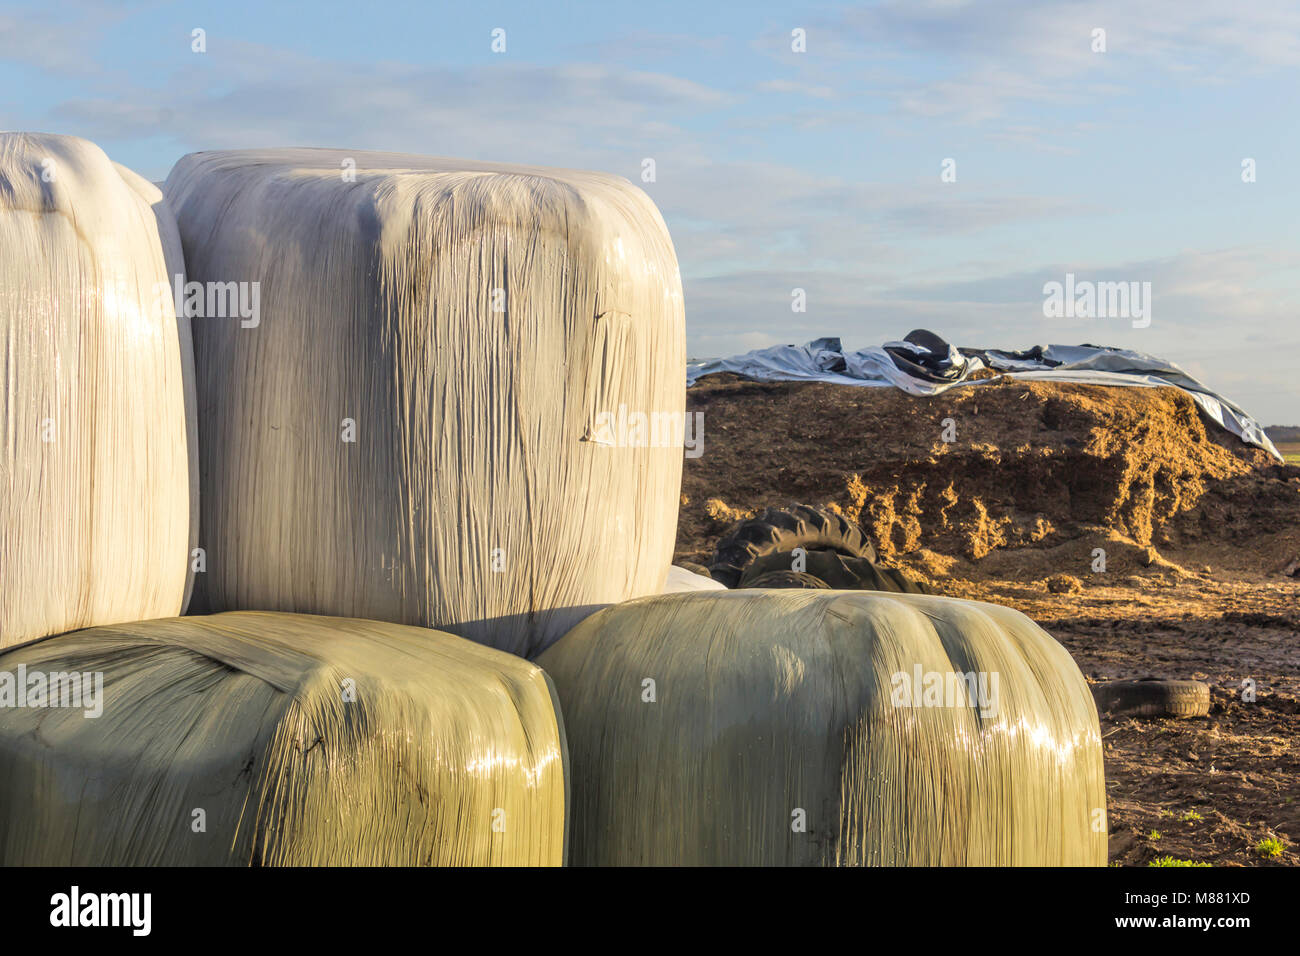 Stacked like a pyramid, round bales of hay and silage wrapped in a white membrane. Food for cows  is stored on the field near the silo.  Dairy farm. Stock Photo